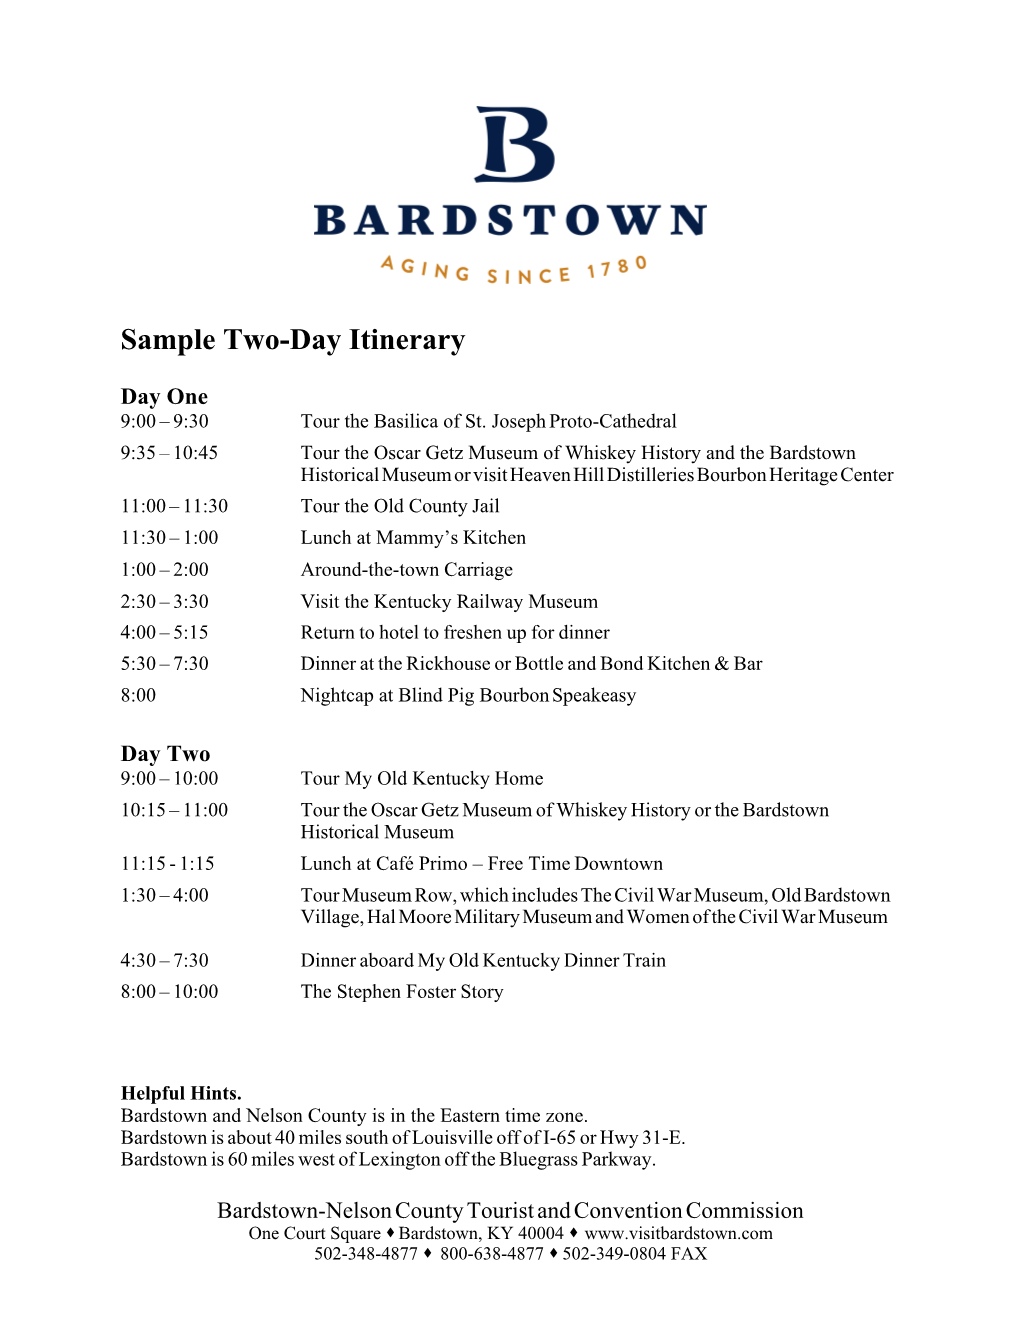 Sample Two-Day Itinerary